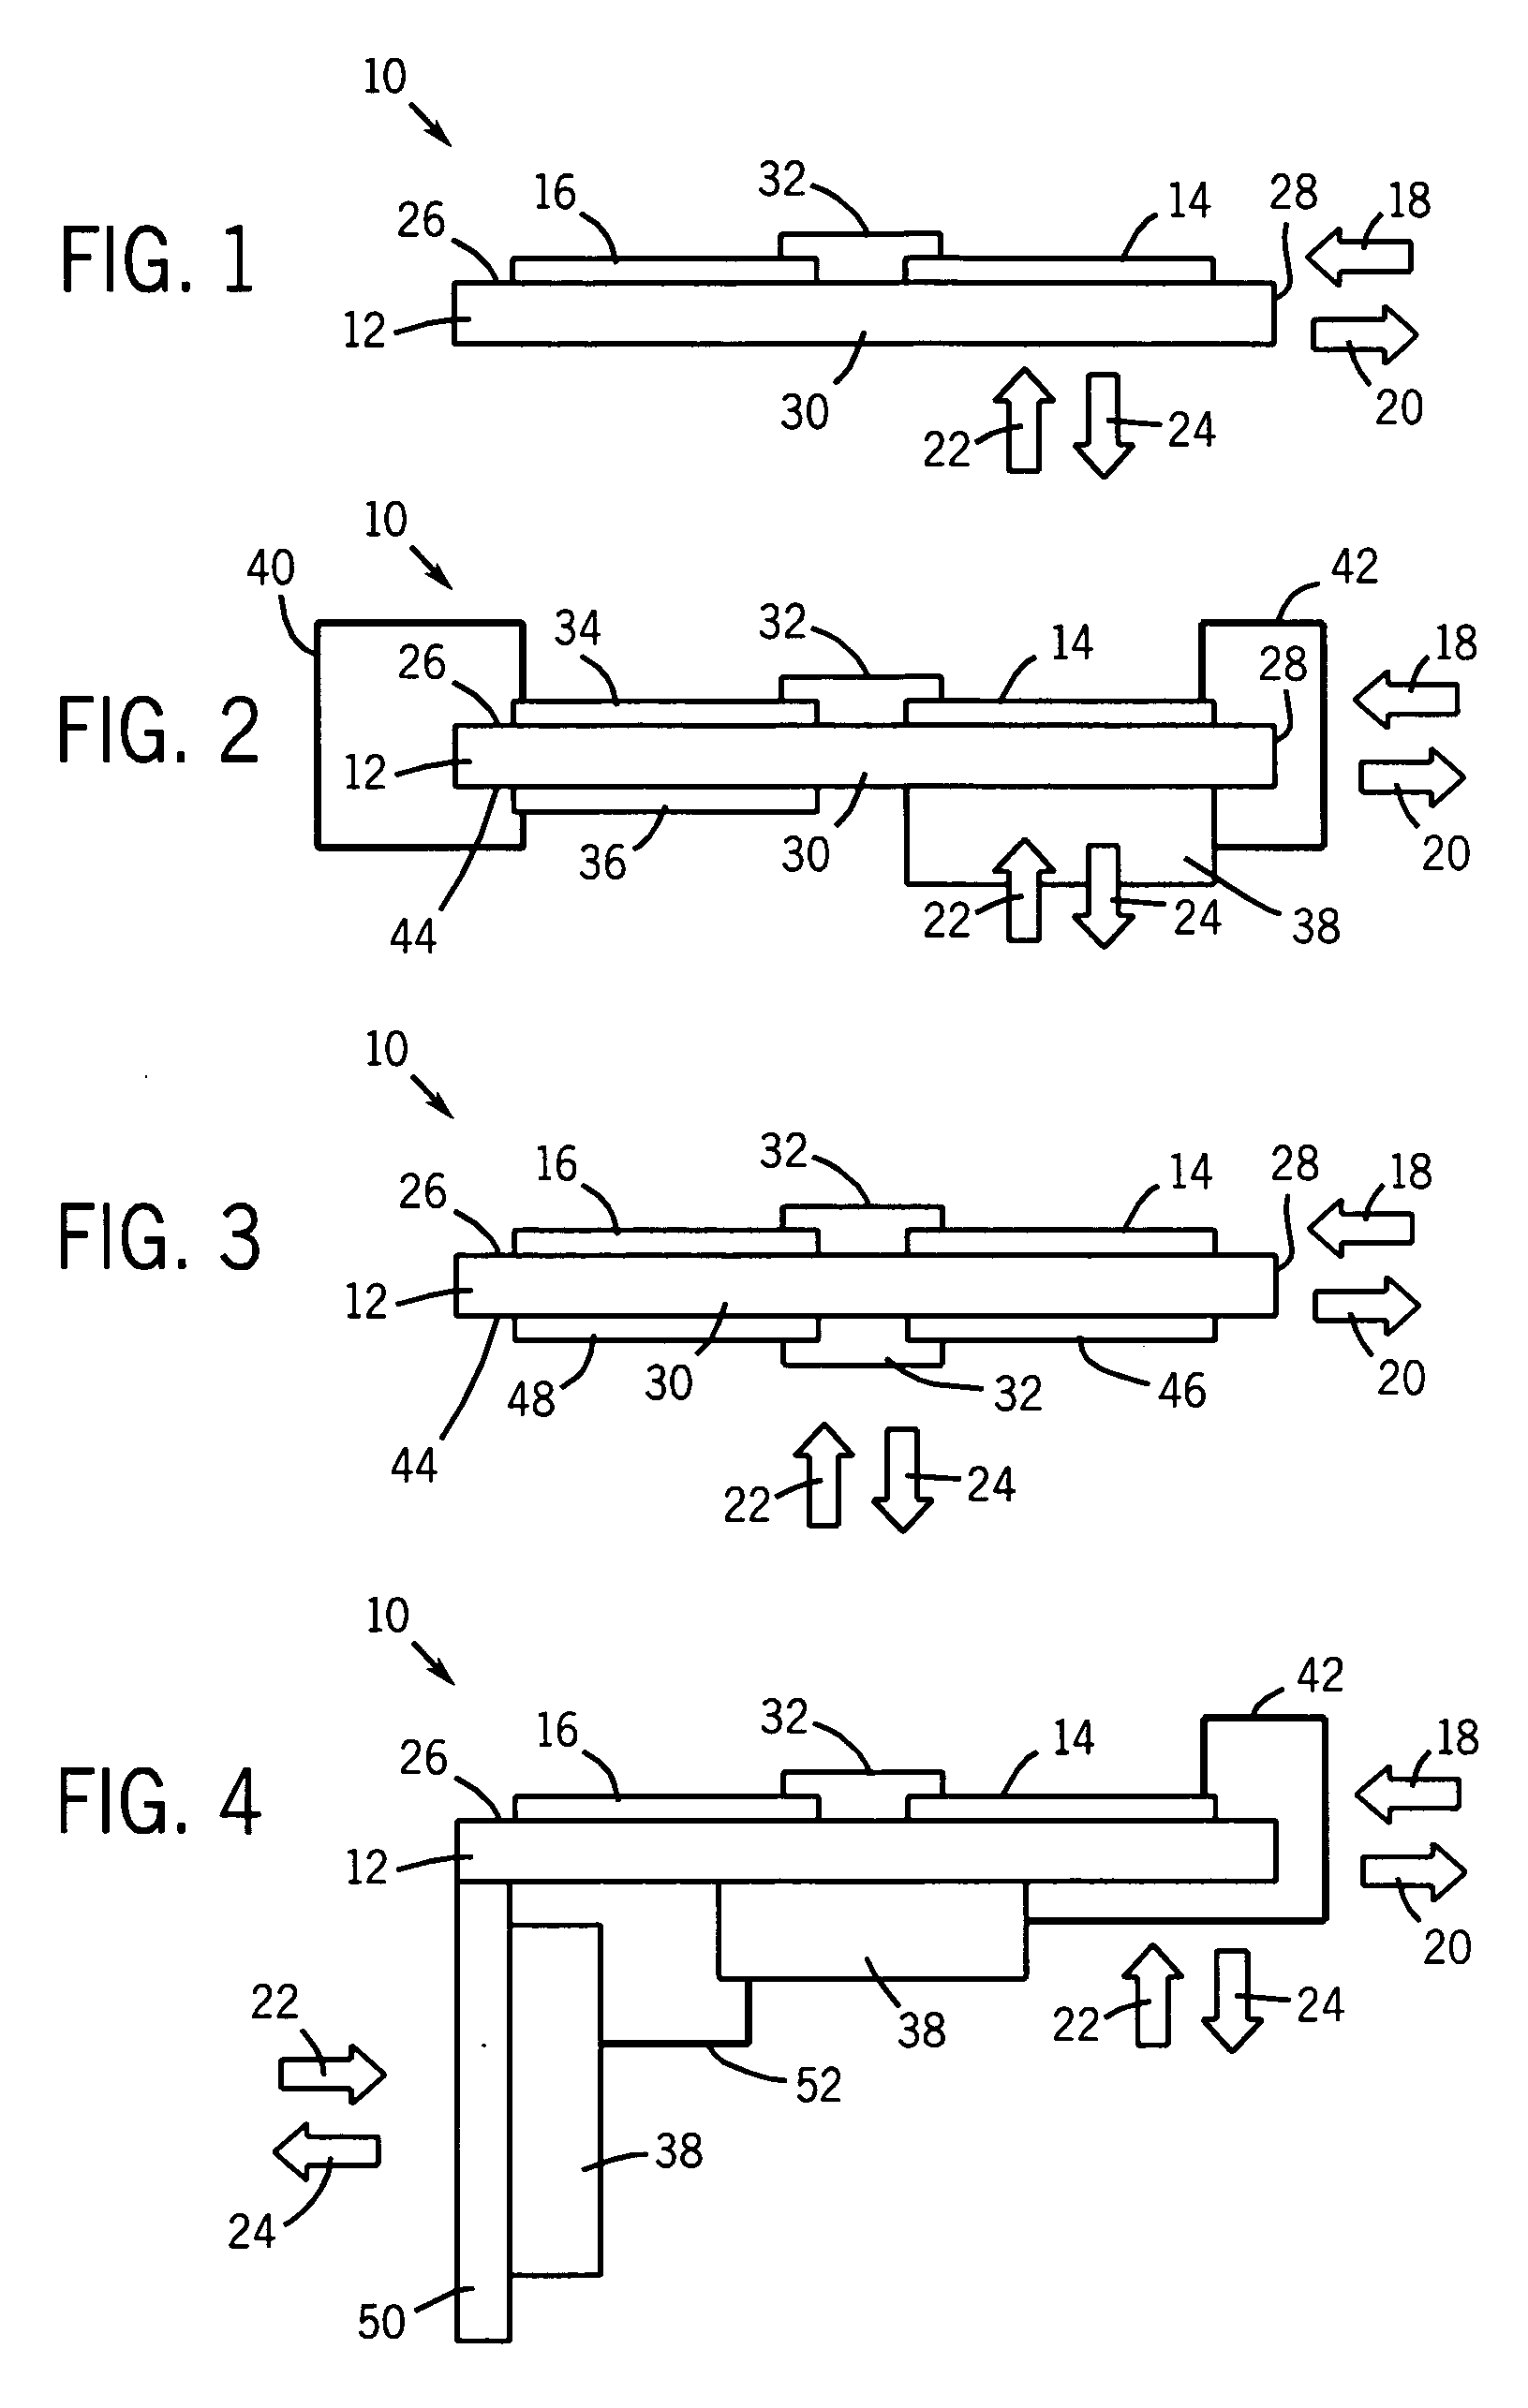 Cooled electrical terminal assembly and device incorporating same